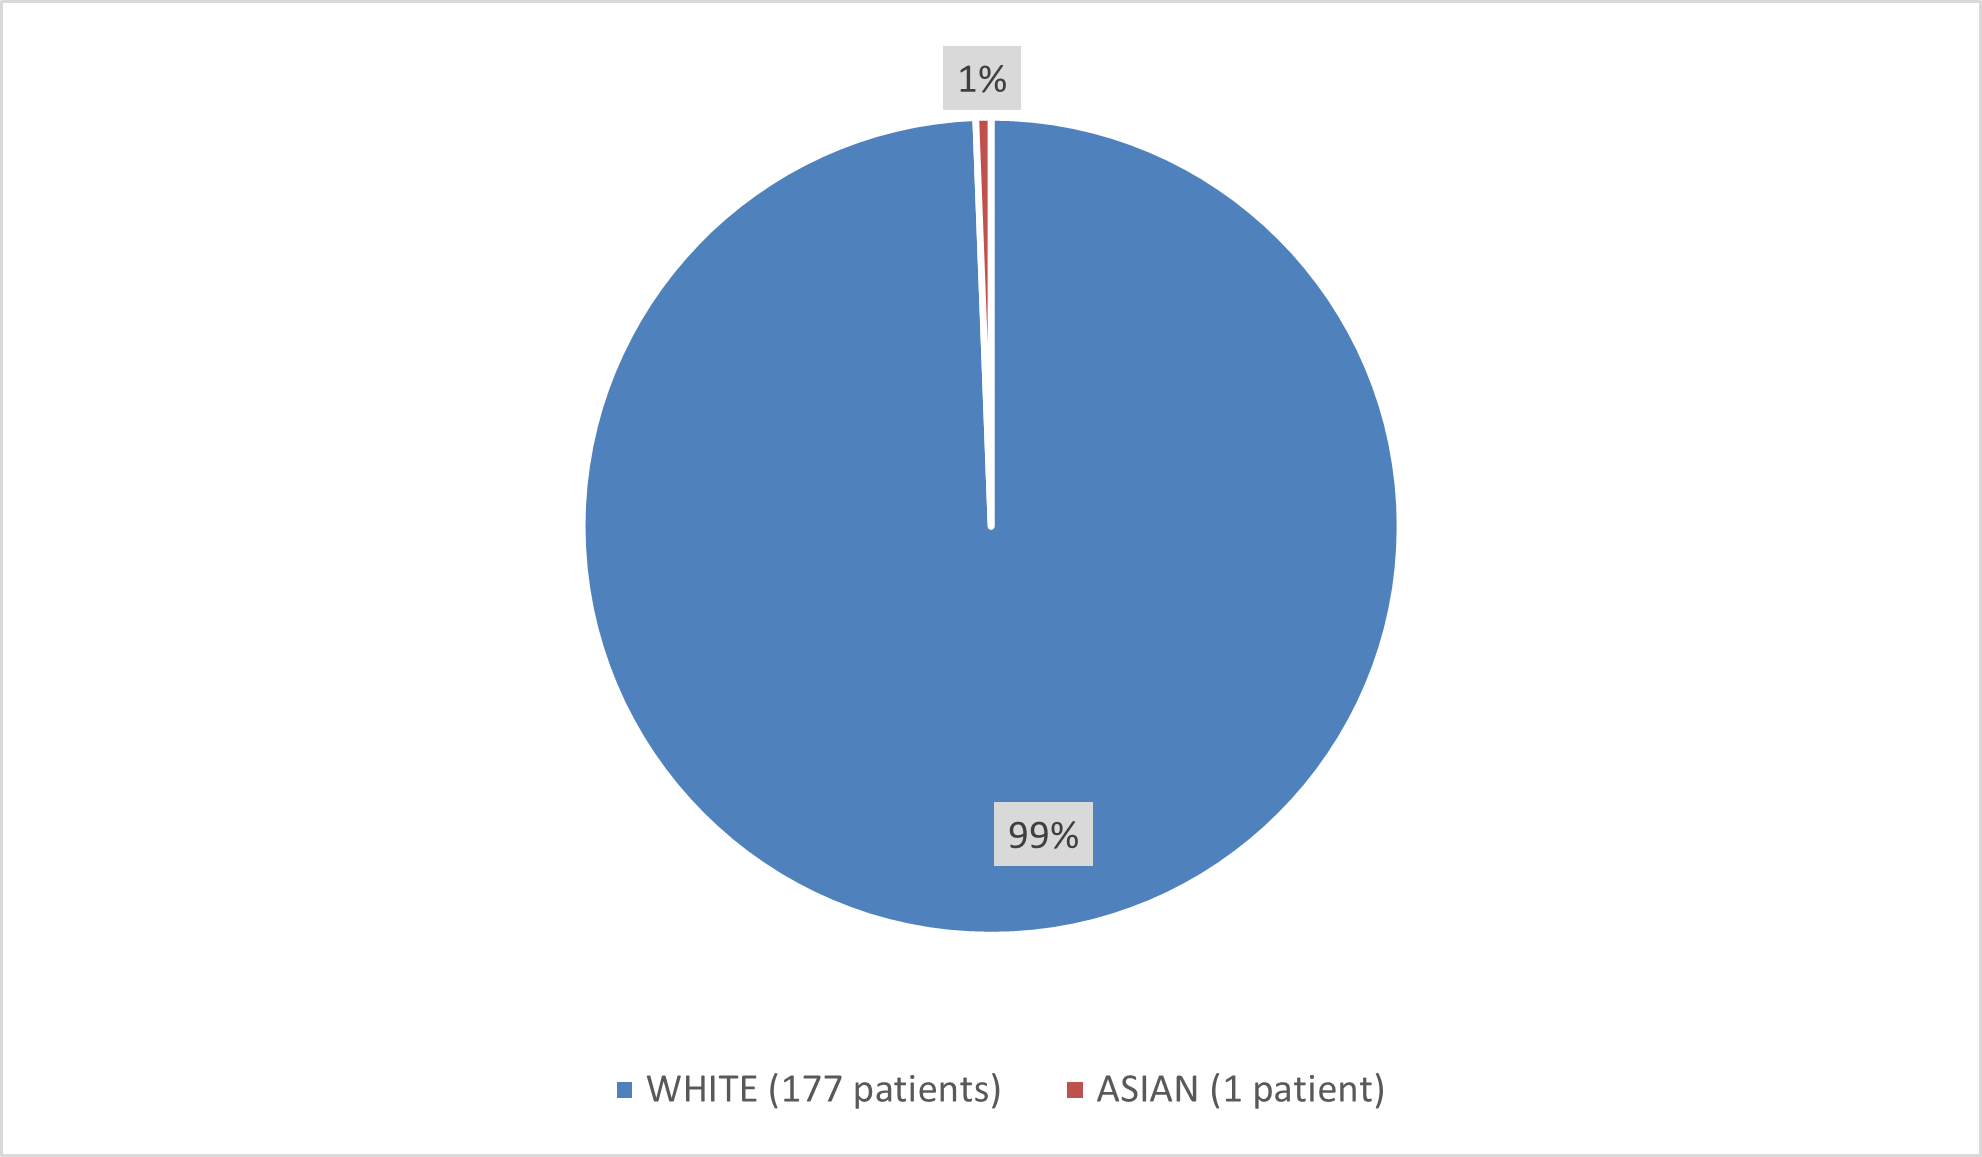 Pie chart summarizing how many White, Black, Asian, and other patients were in the clinical trial. In total, 177 (99%) White patients and 1 (1%) Asian patients participated in the clinical trial.